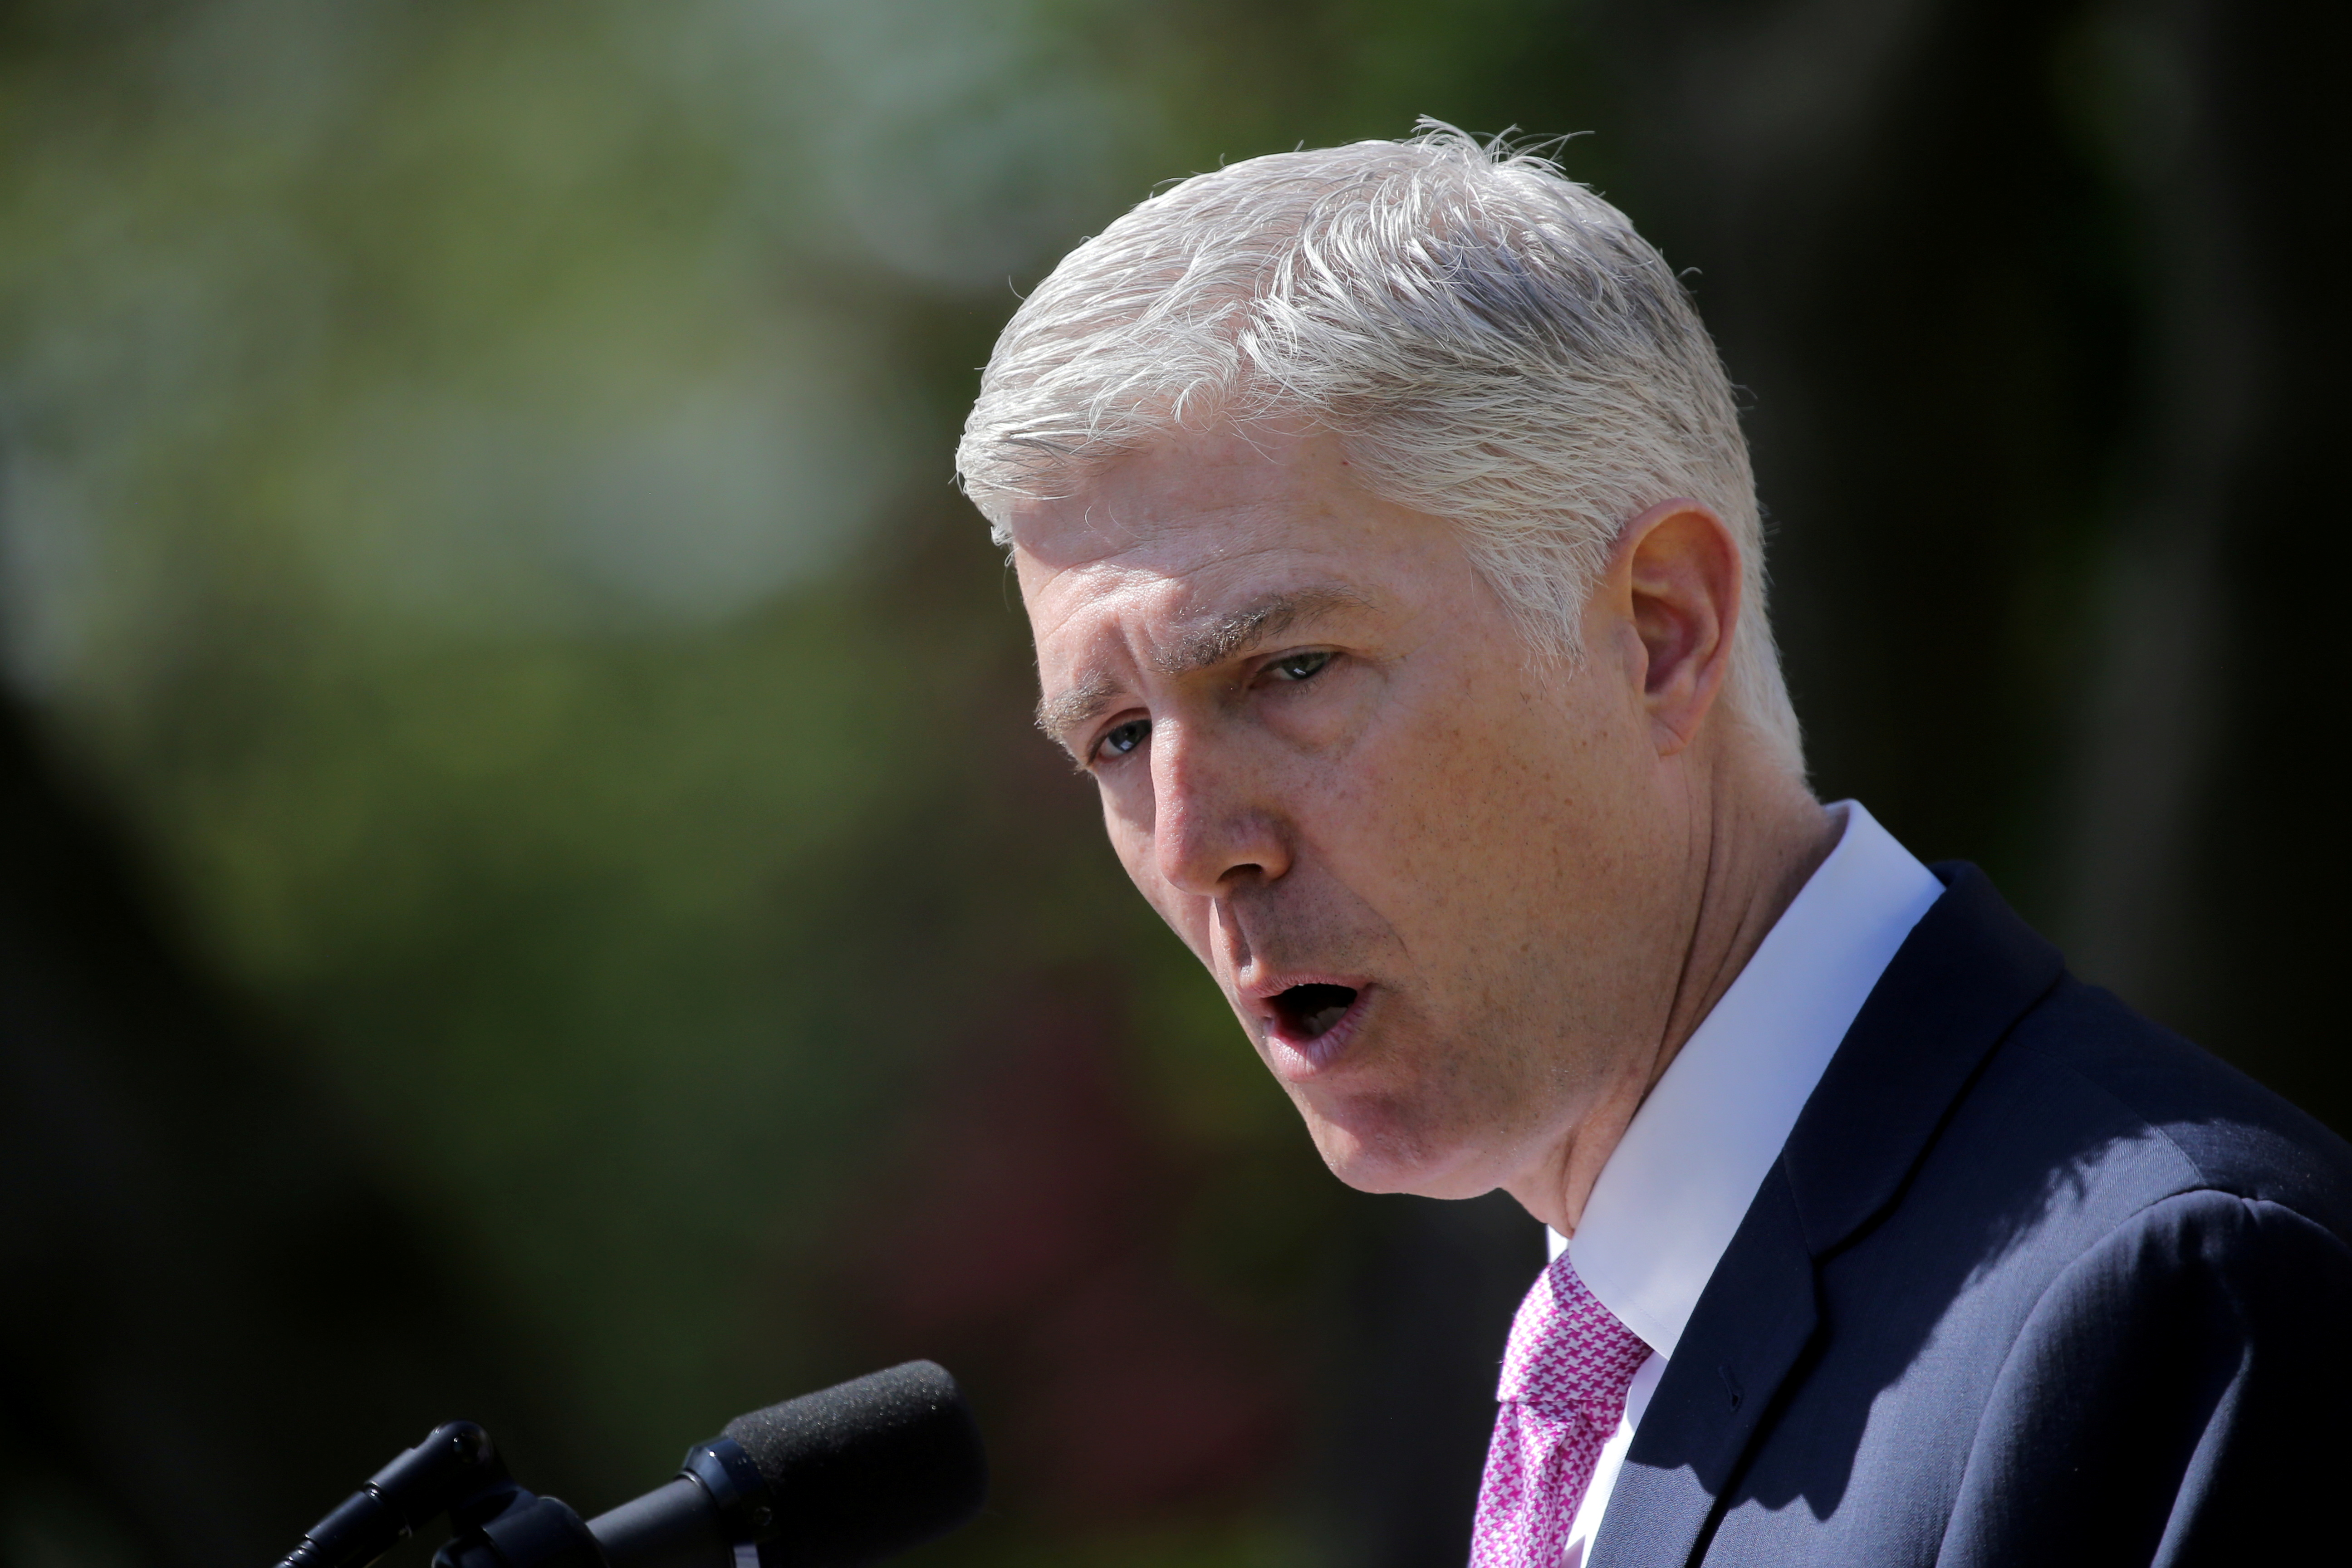 Judge Neil Gorsuch speaks after his swearing as an associate justice of the Supreme Court in the Rose Garden of the White House in Washington